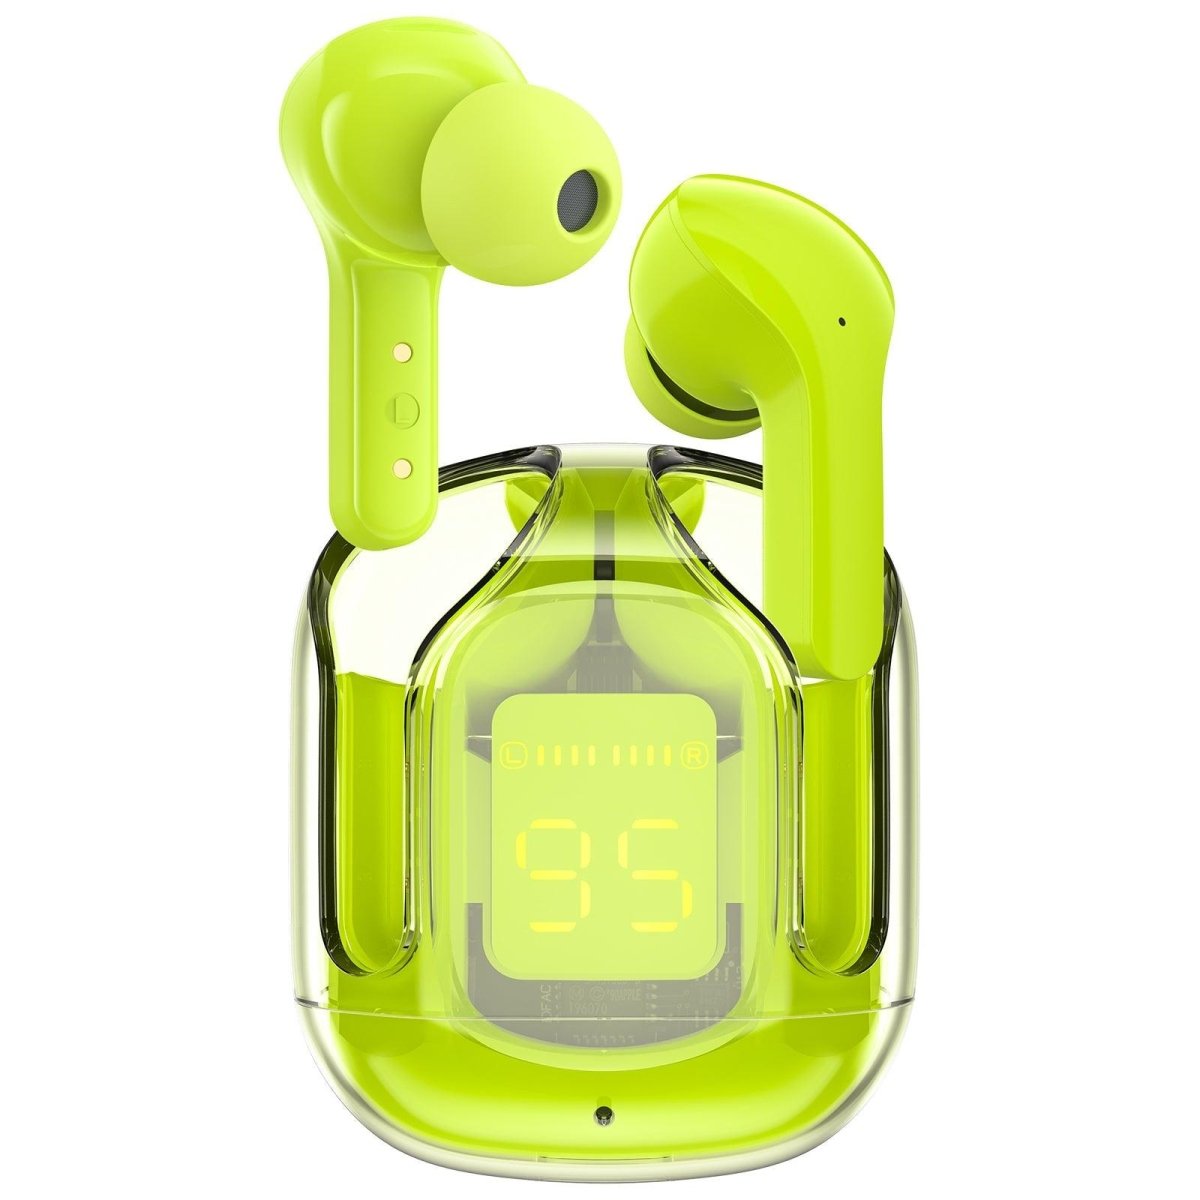 Crystal Wireless Earbuds